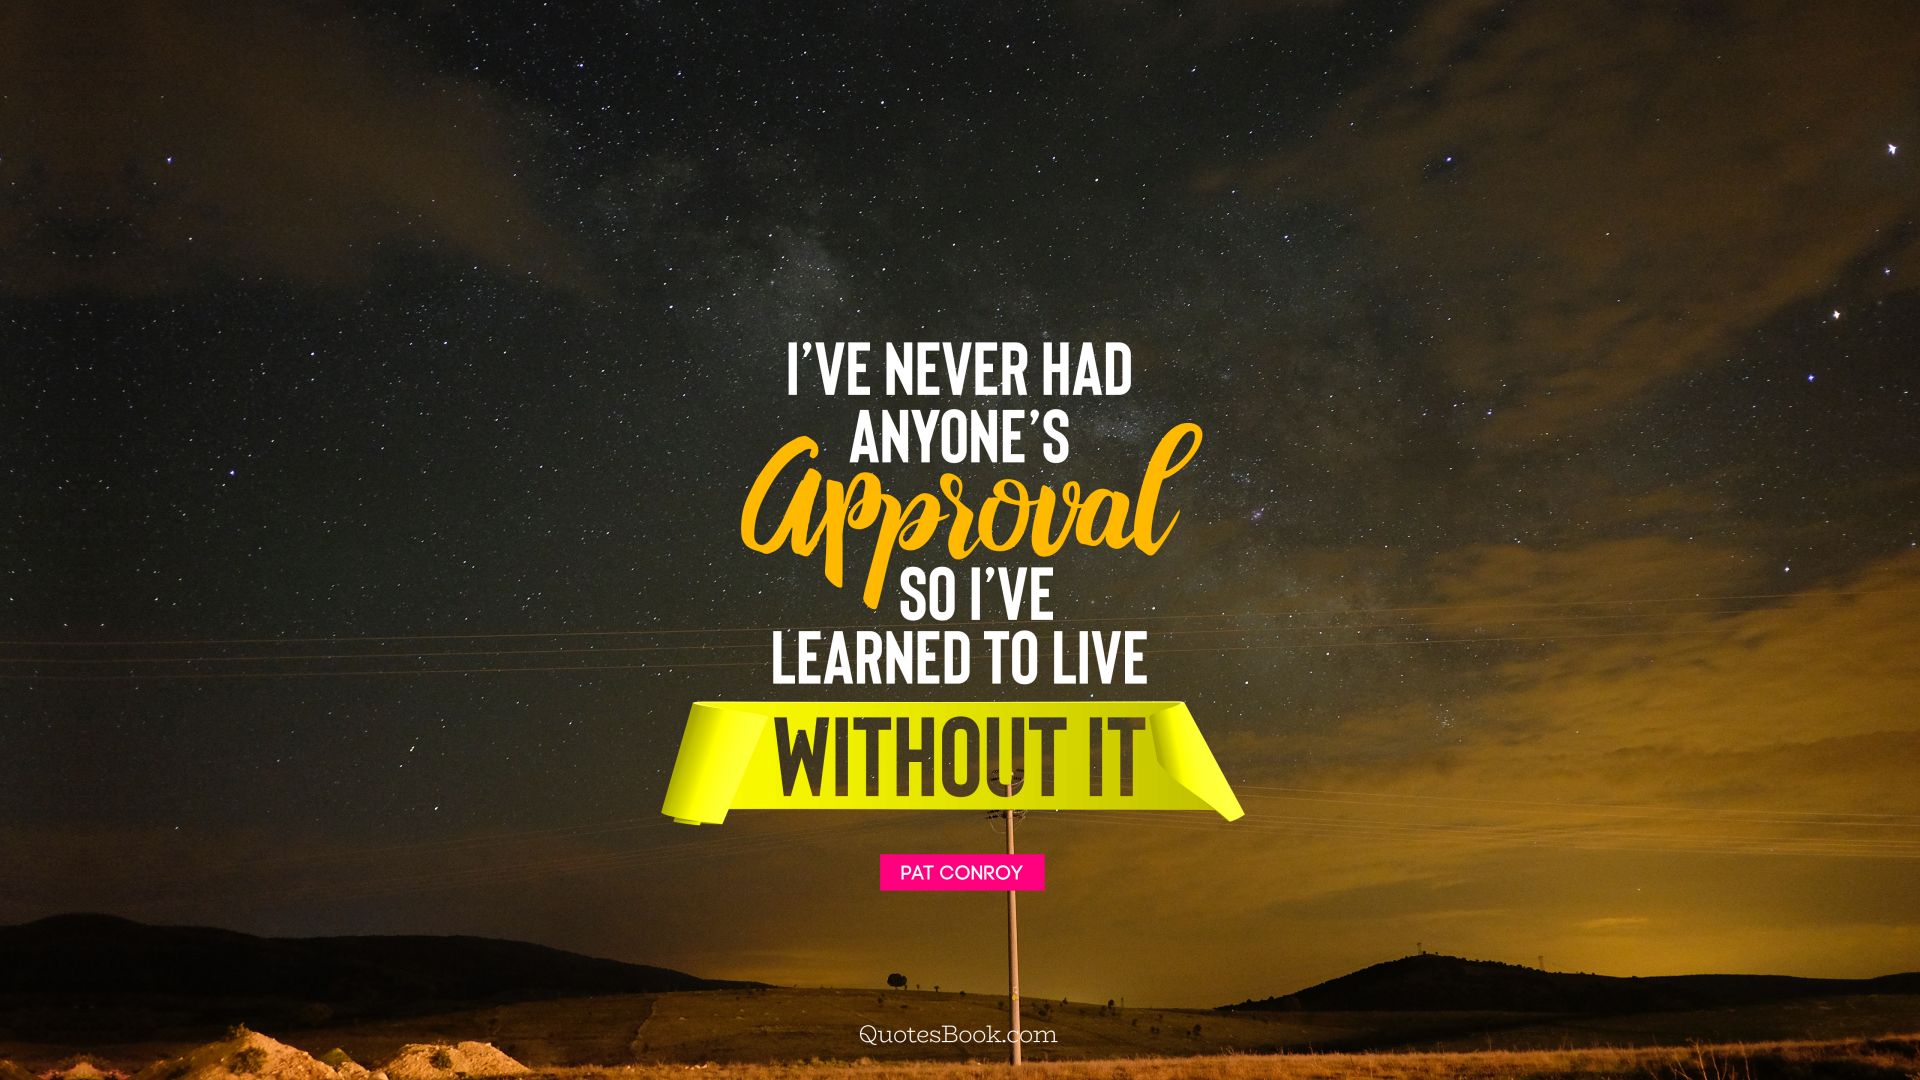 I’ve never had anyone’s approval, so I’ve learned to live without it. - Quote by Pat Conroy